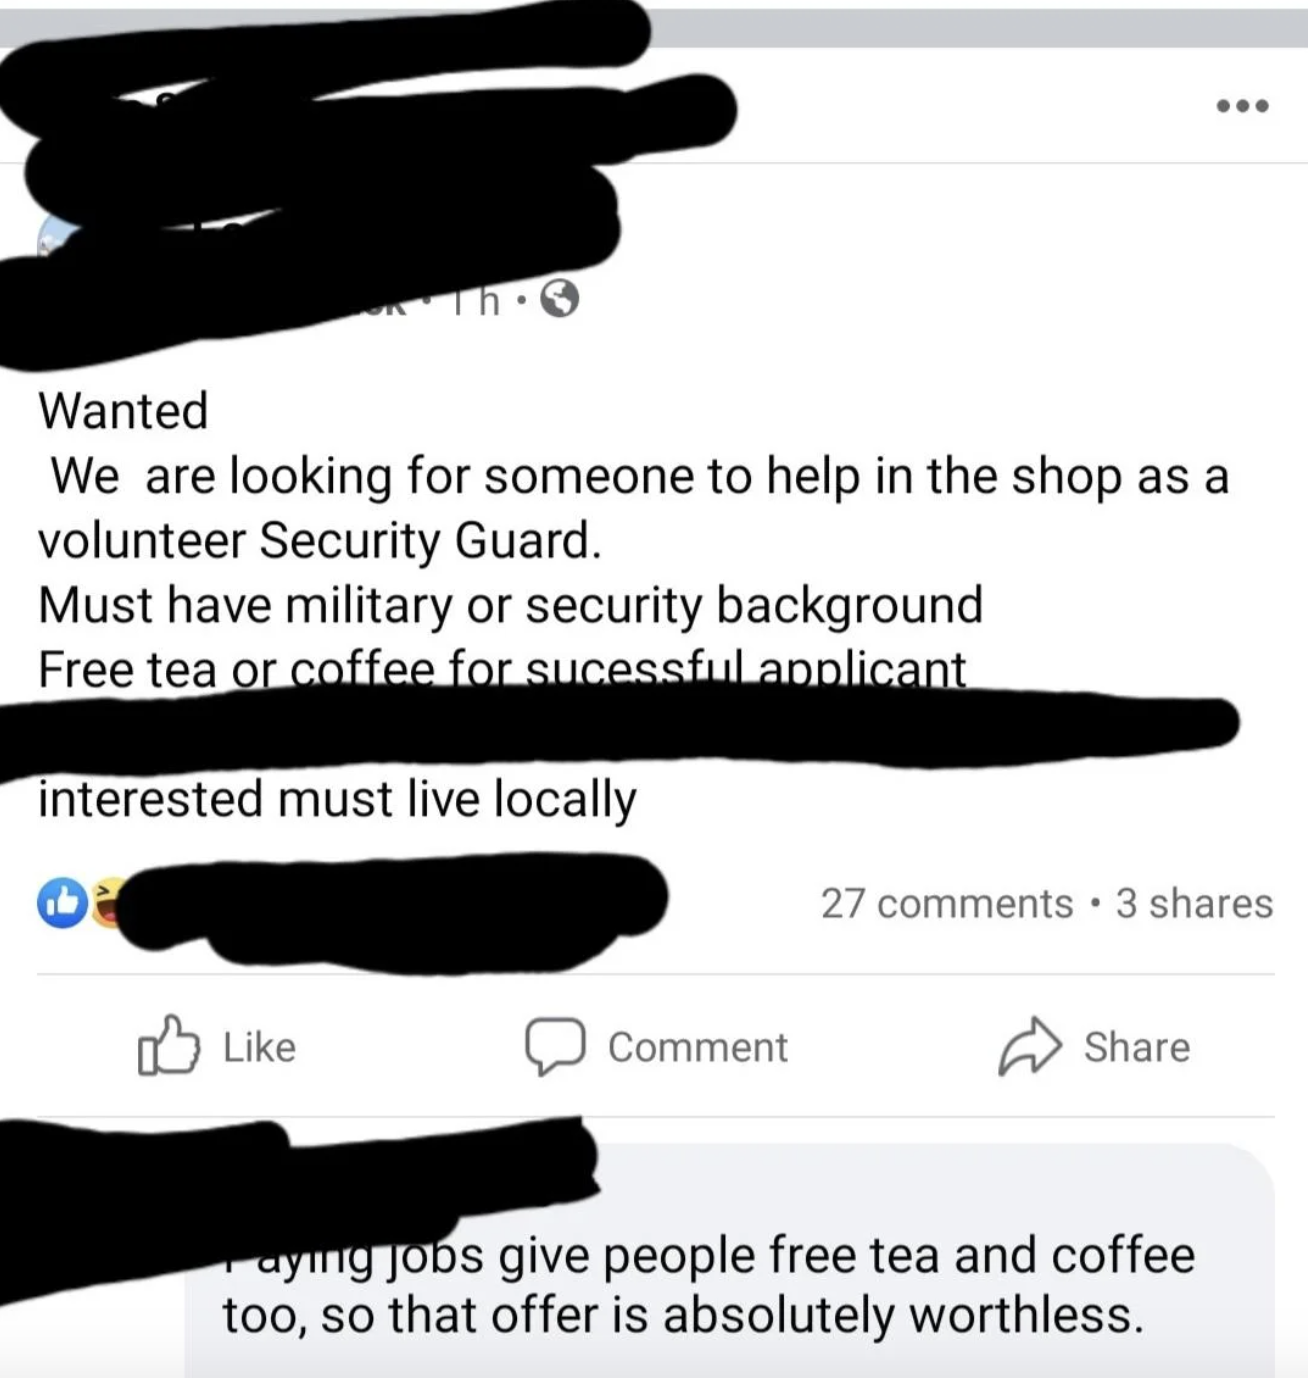 Security guard job listing: &quot;Wanted — we are looking for someone to help in the shop as a volunteer security guard. Must have military background. Free tea or coffee for successful applicant&quot;